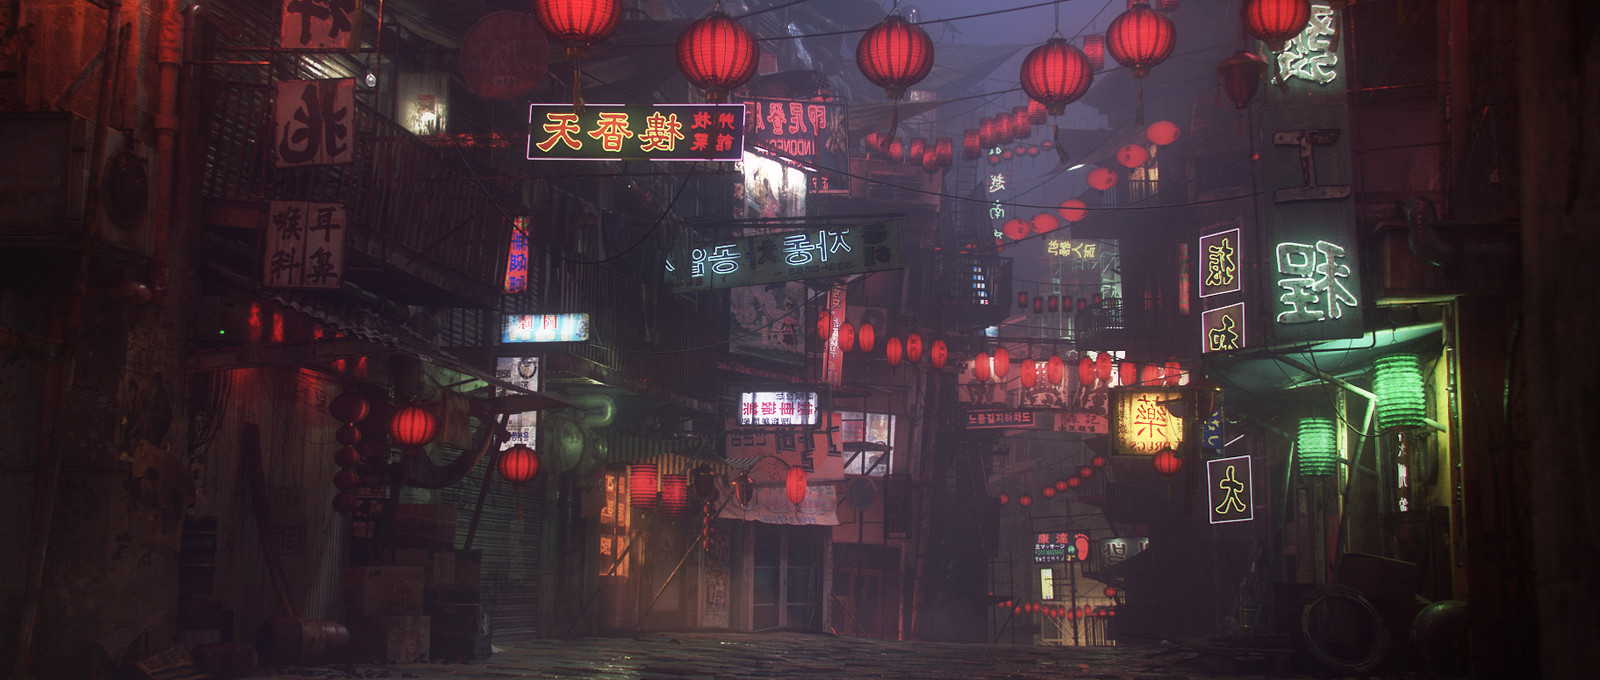 Chinatown - All aspects -